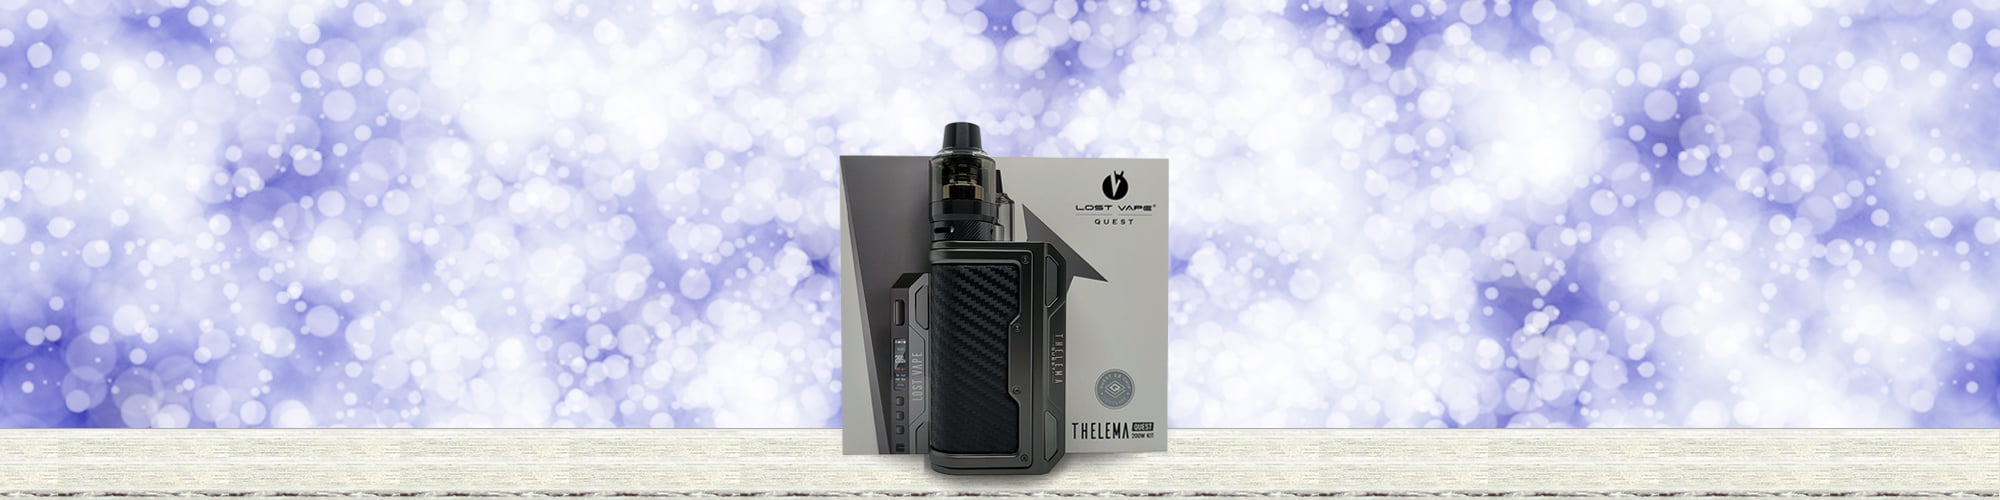 Lost Vape Thelema Quest Kit Review Main Banner